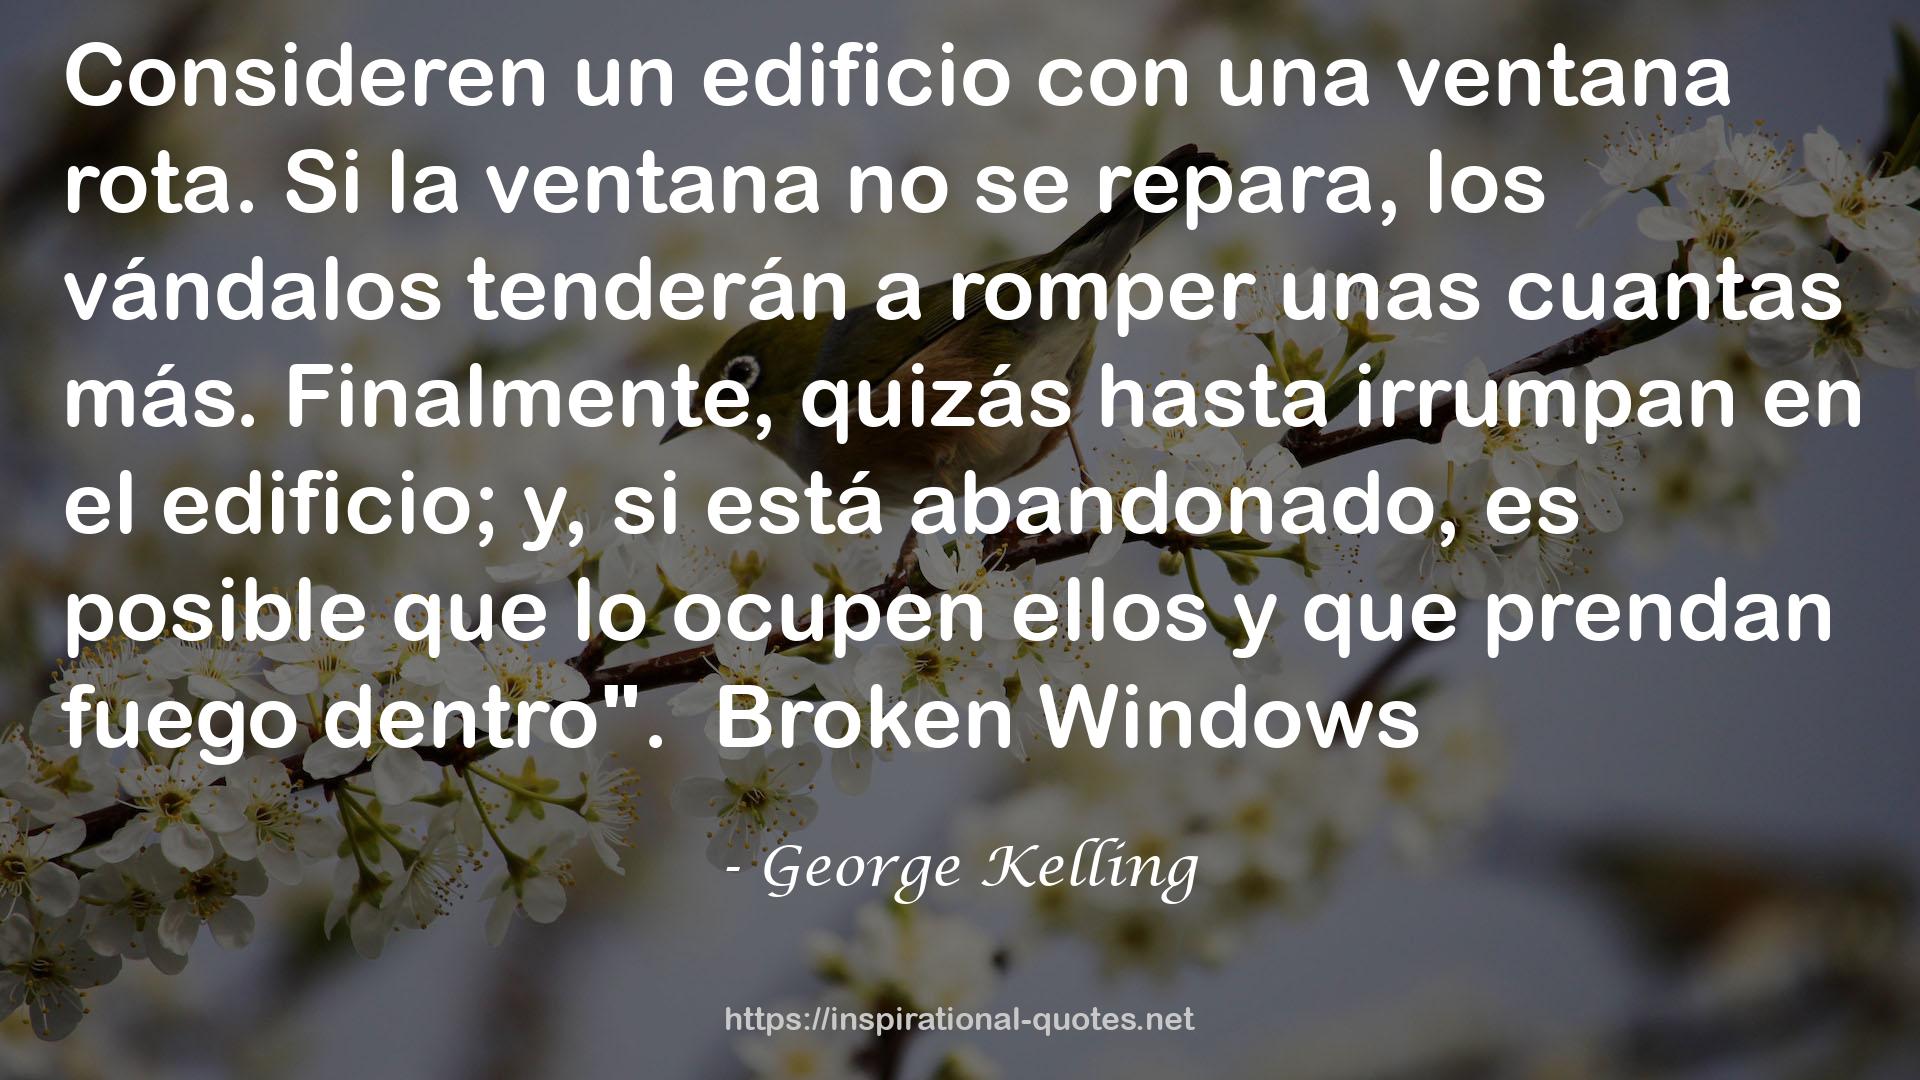 George Kelling QUOTES